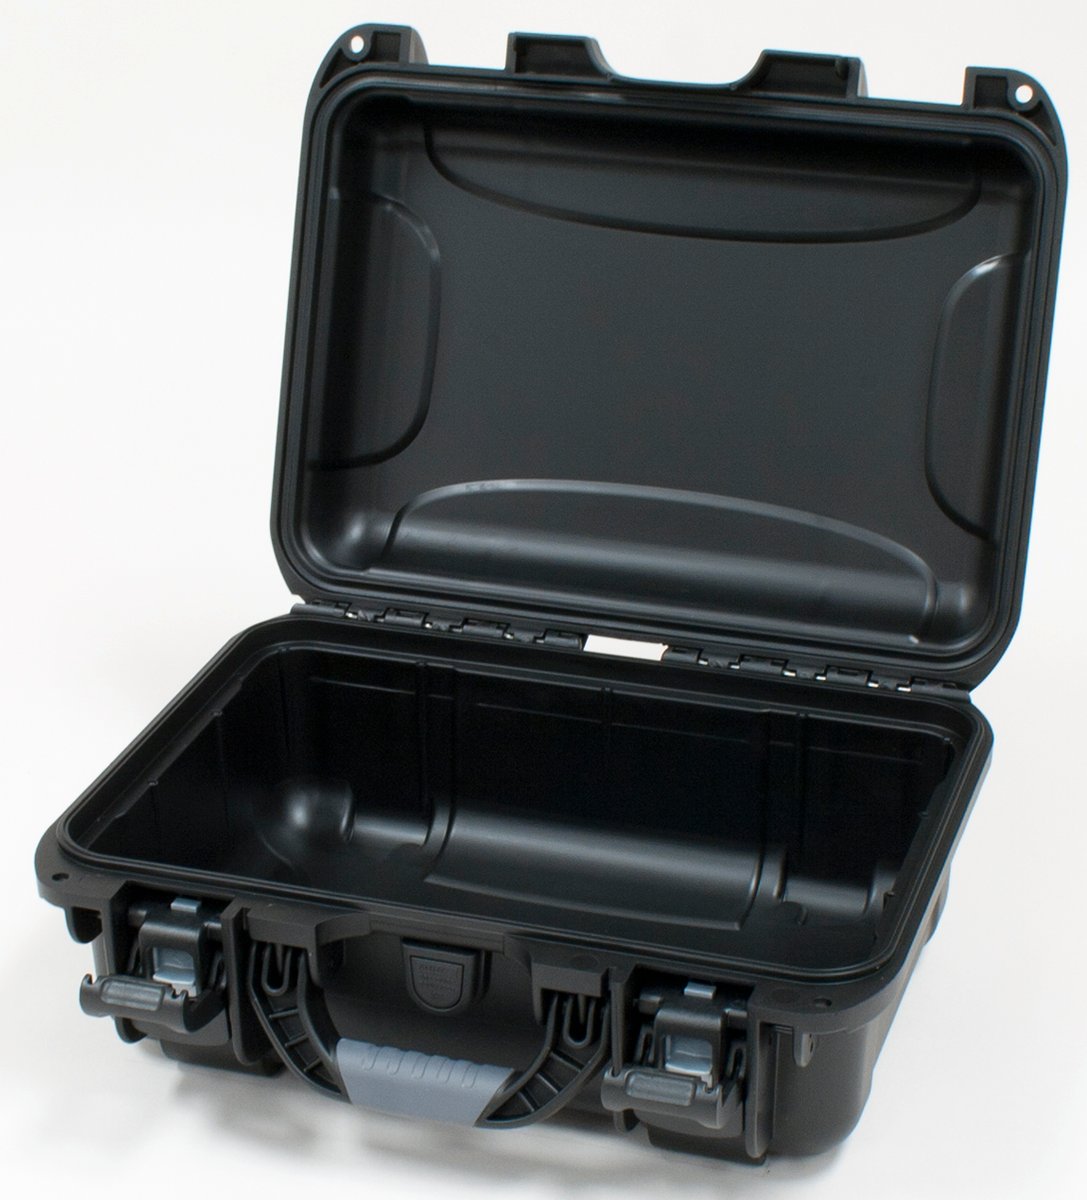 Black waterproof injection molded case with interior dimensions of 13.8" x 9.3" x 6.2". NO FOAM